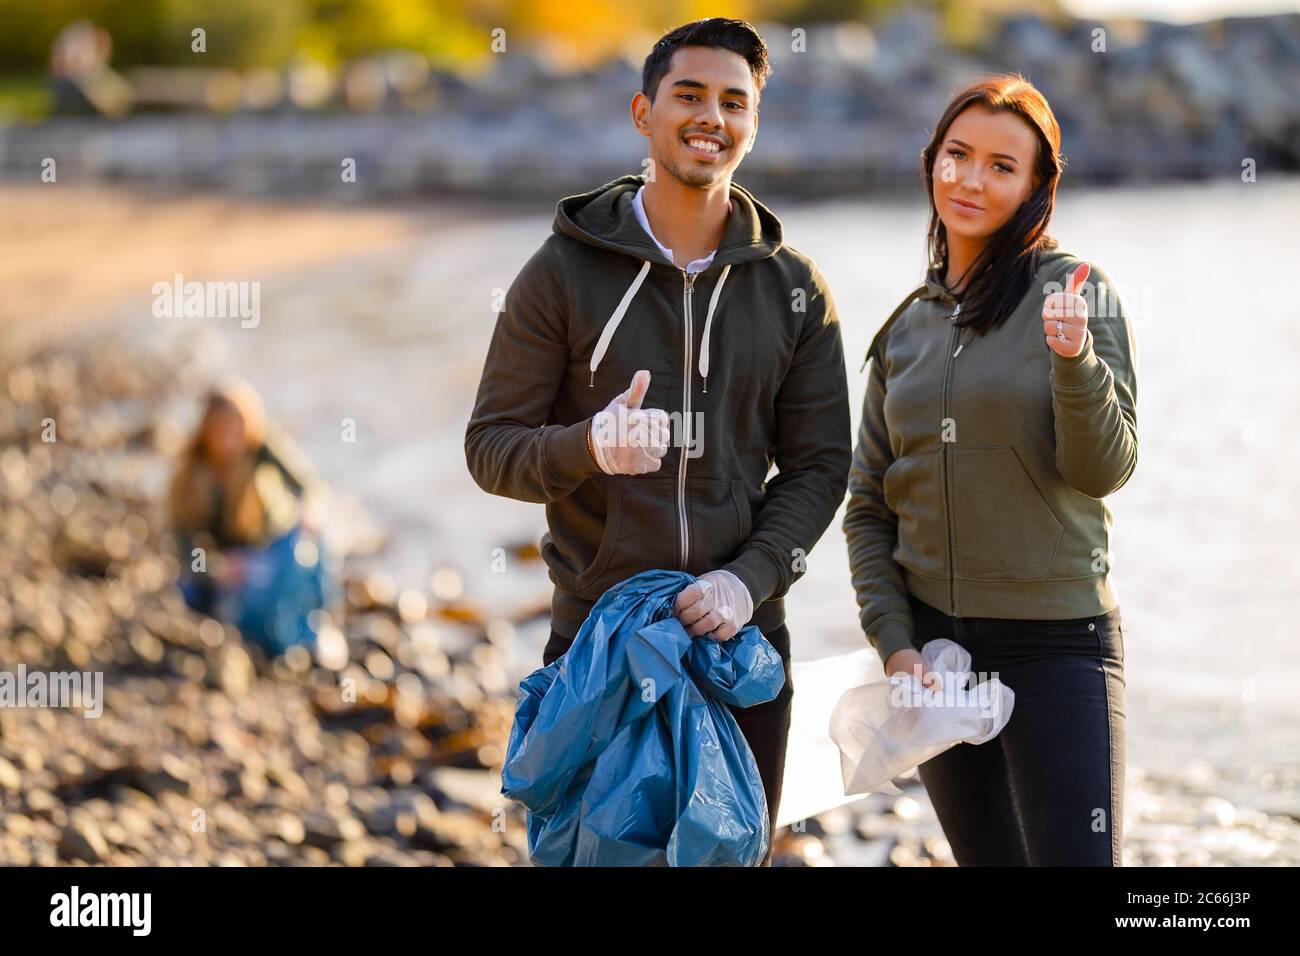 Young volunteers showing thumbs up at beach Stock Photo